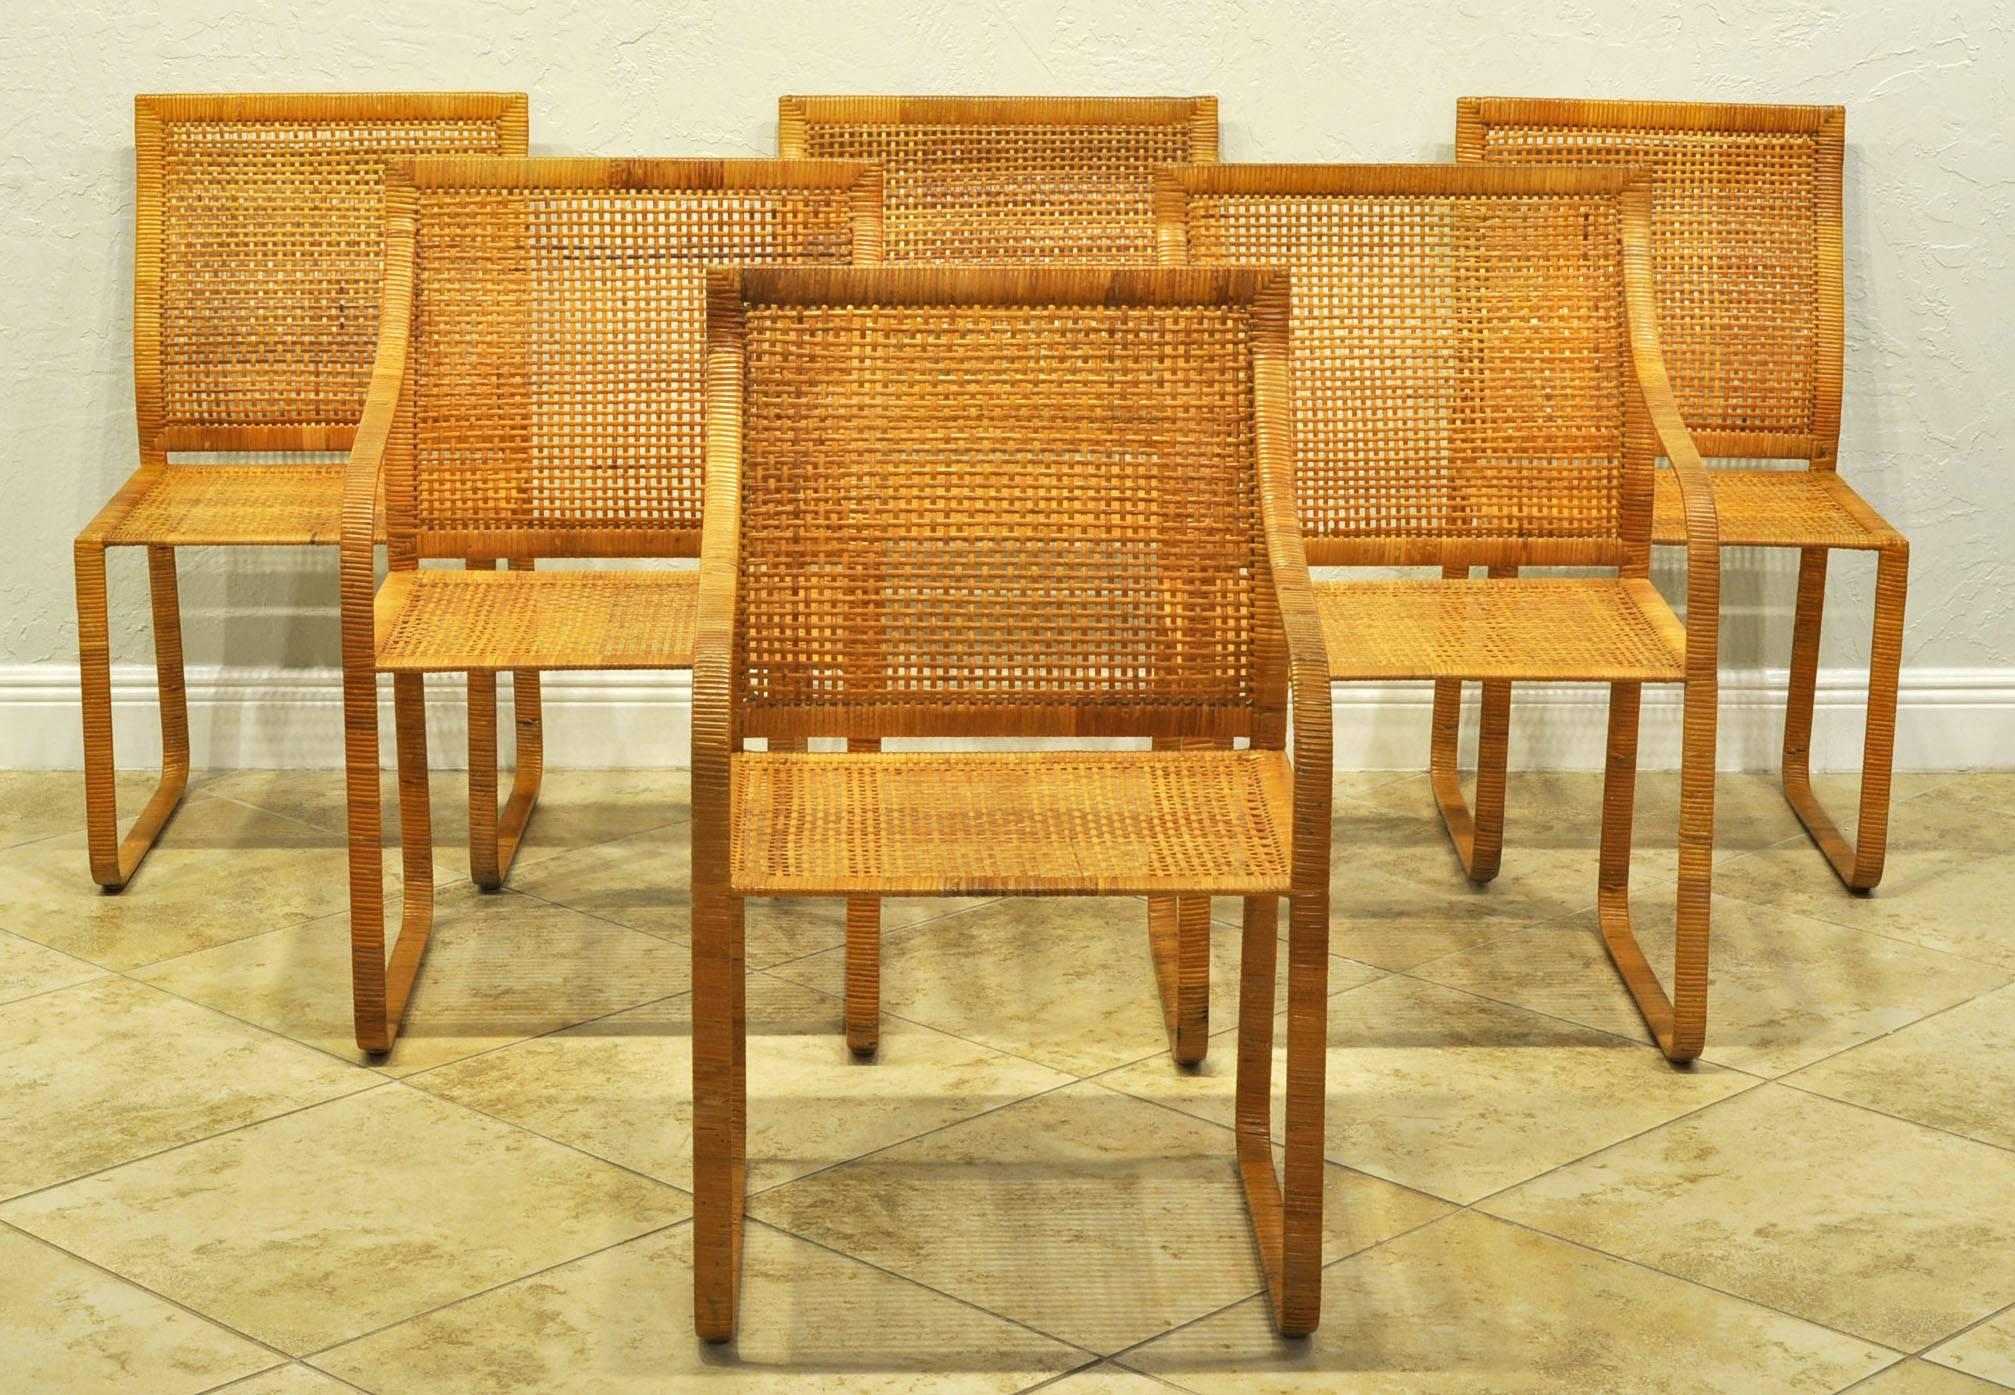 Set of six Harvey Probber Dining Chairs. 4 Arms and 2 Sides. Woven Rattan over steel frames. Overall great condition. Seats and Backs with no breaks. A few loose woven ends on arms or legs. Not marked. Very heavy and sturdy. Comes with upholstered